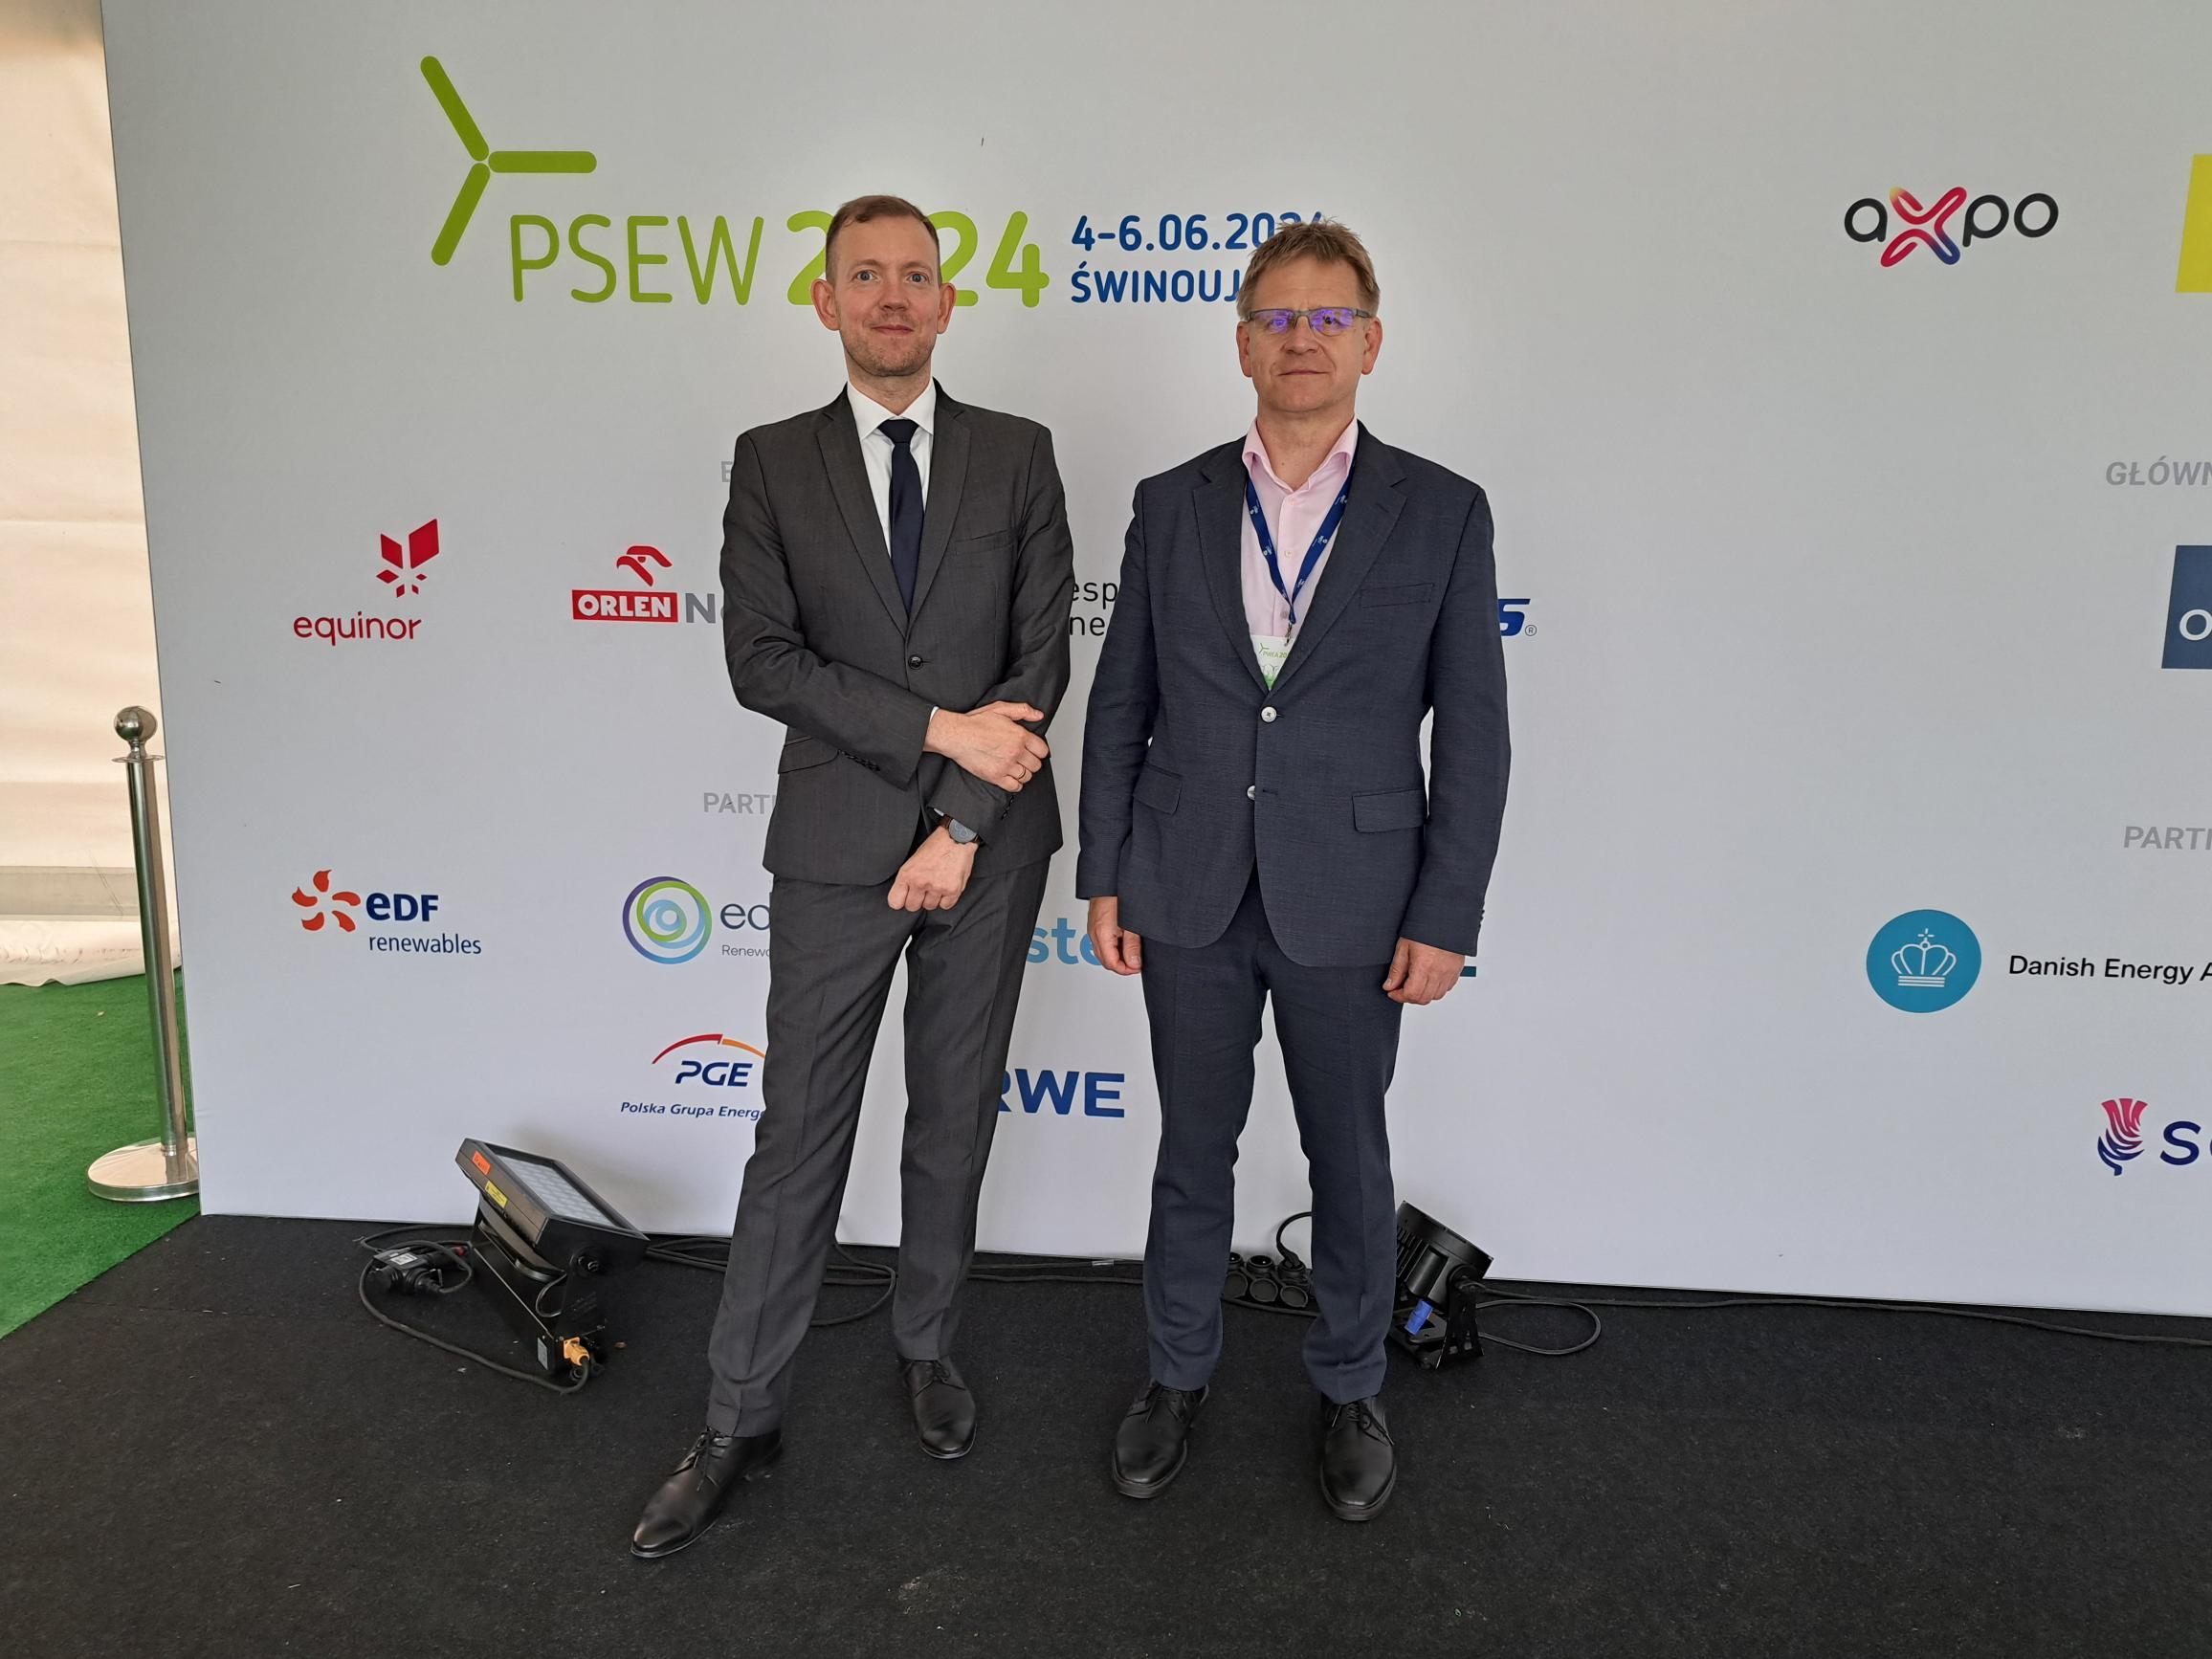 Lukasz Sikorski, Director of Europe, OWC and Tomasz Kwiatowski, Country Manager, OWC Poland attend the PSEW Conference 2024 exhibition. 